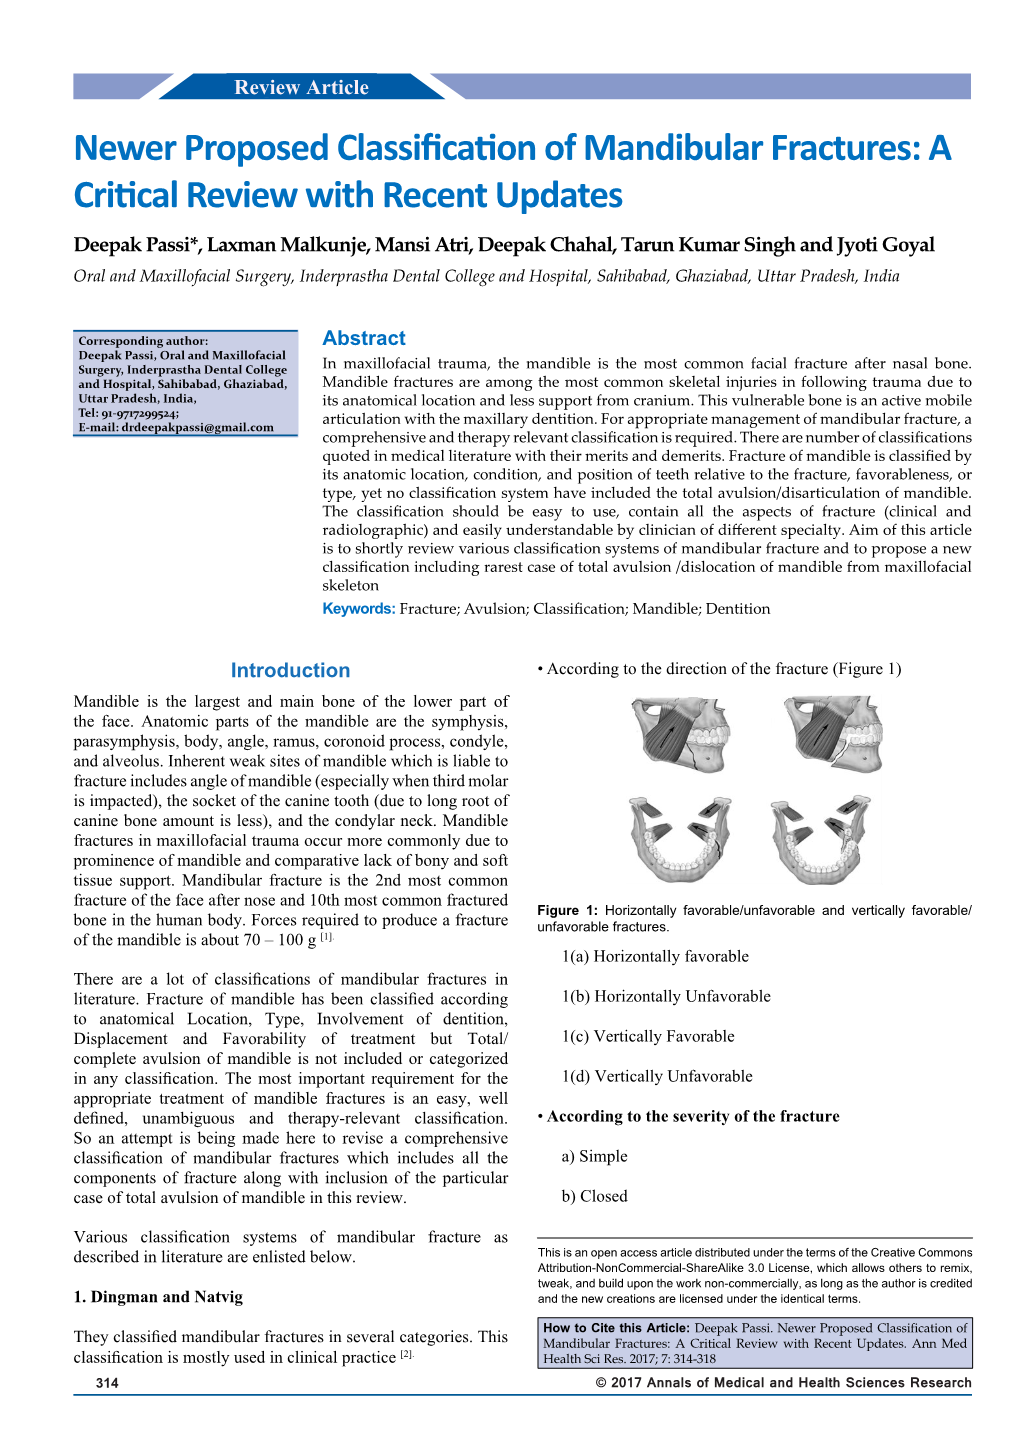 Newer Proposed Classification of Mandibular Fractures